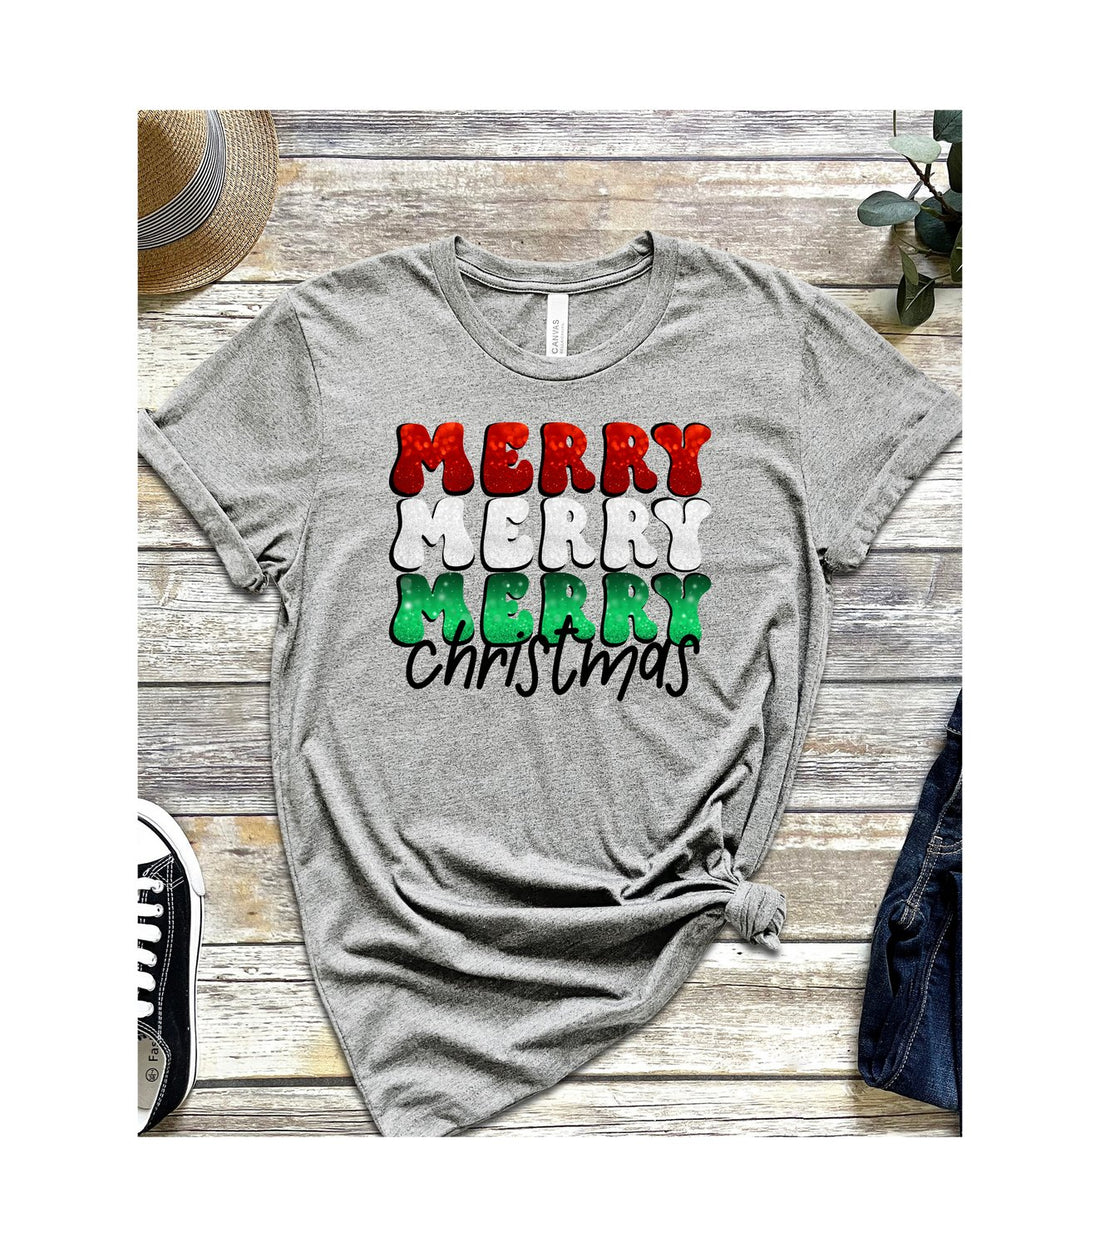 Merry Repeat Christmas - T-Shirts - Positively Sassy - Merry Repeat Christmas